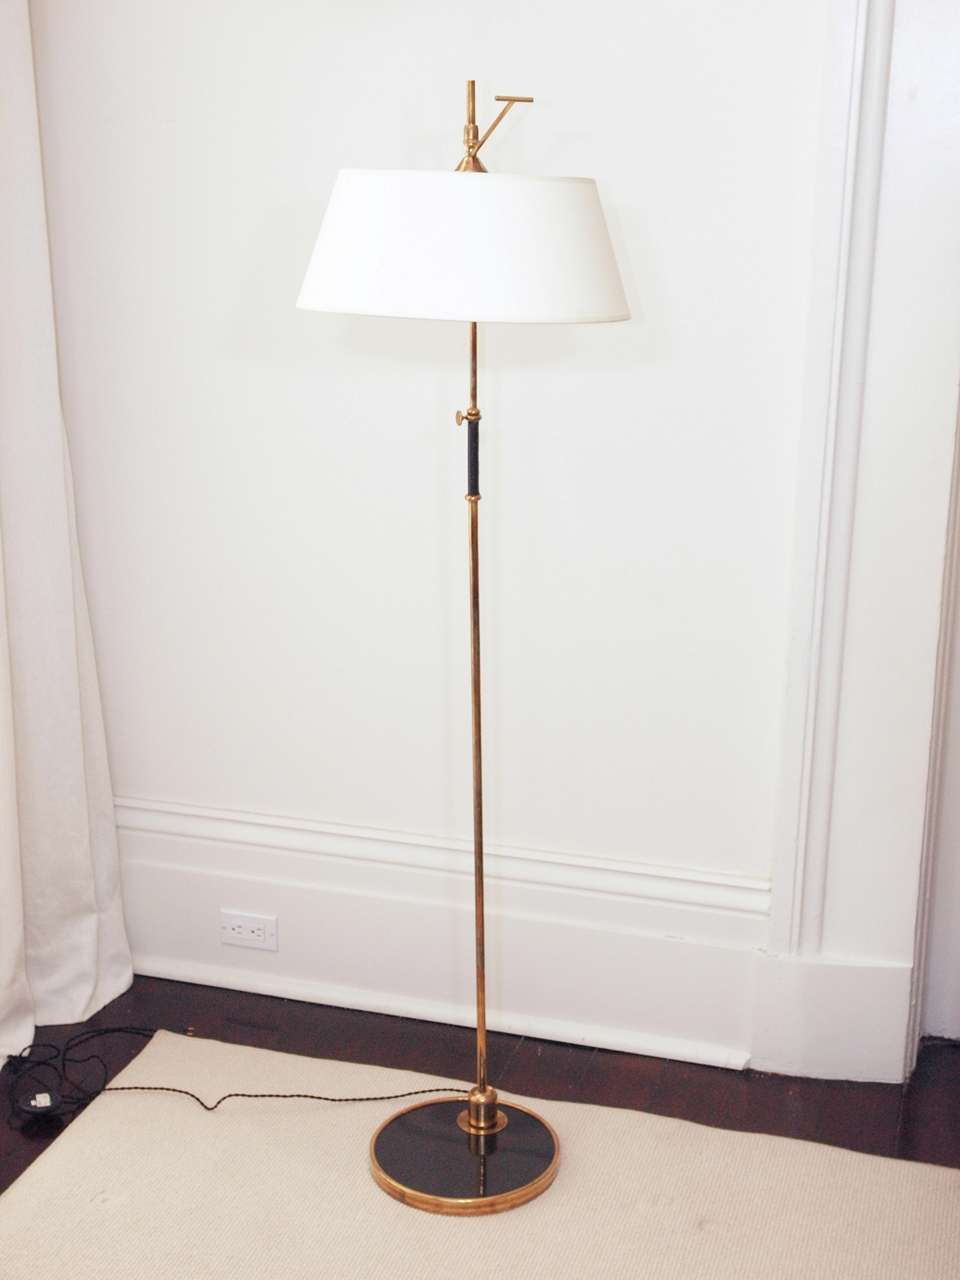 Adjustable one-light floor lamp in bronze with original heavy paper shade; height adjustable by set screw at the stem; tilts forward by ball-joint at the base; shade adjusts by handle at the top; original socket accepts B-22 bayonet lamp; in-line